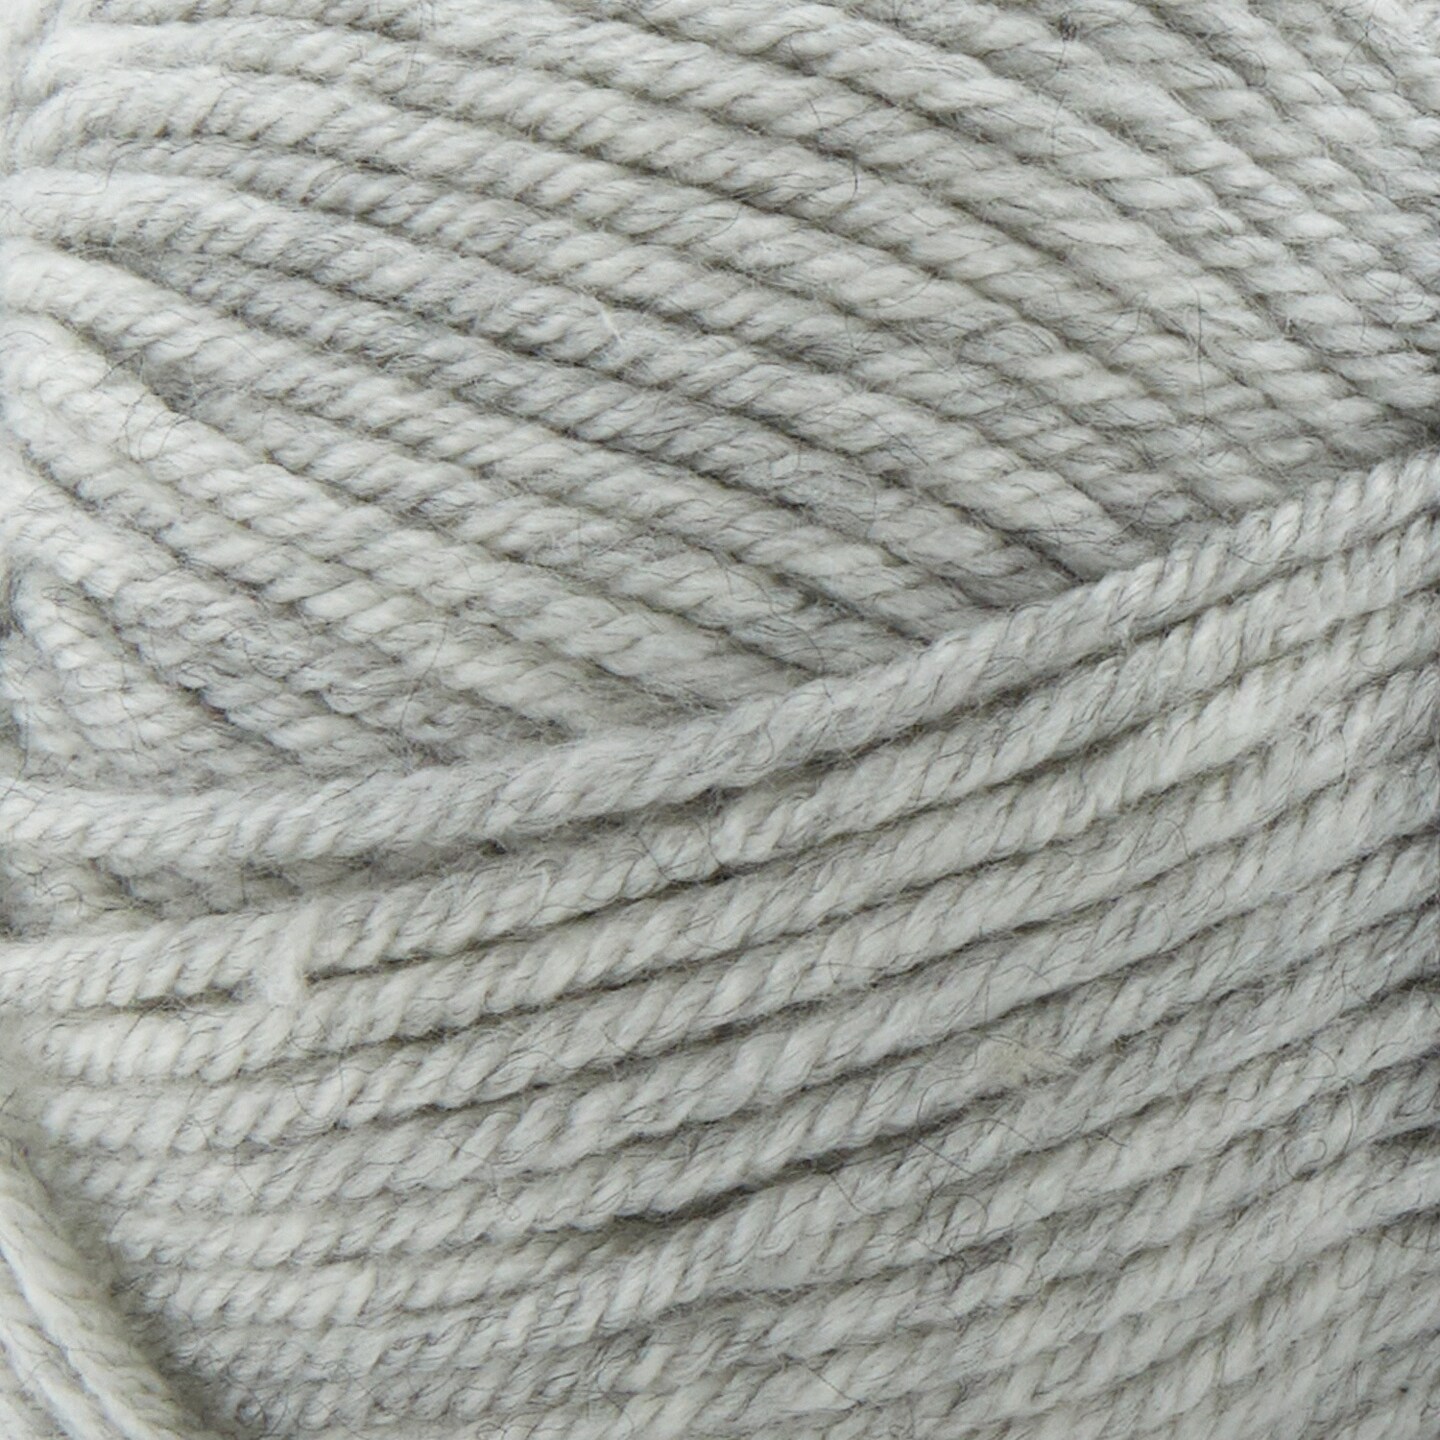 Premier Anti-Pilling Everyday Worsted Yarn | Michaels